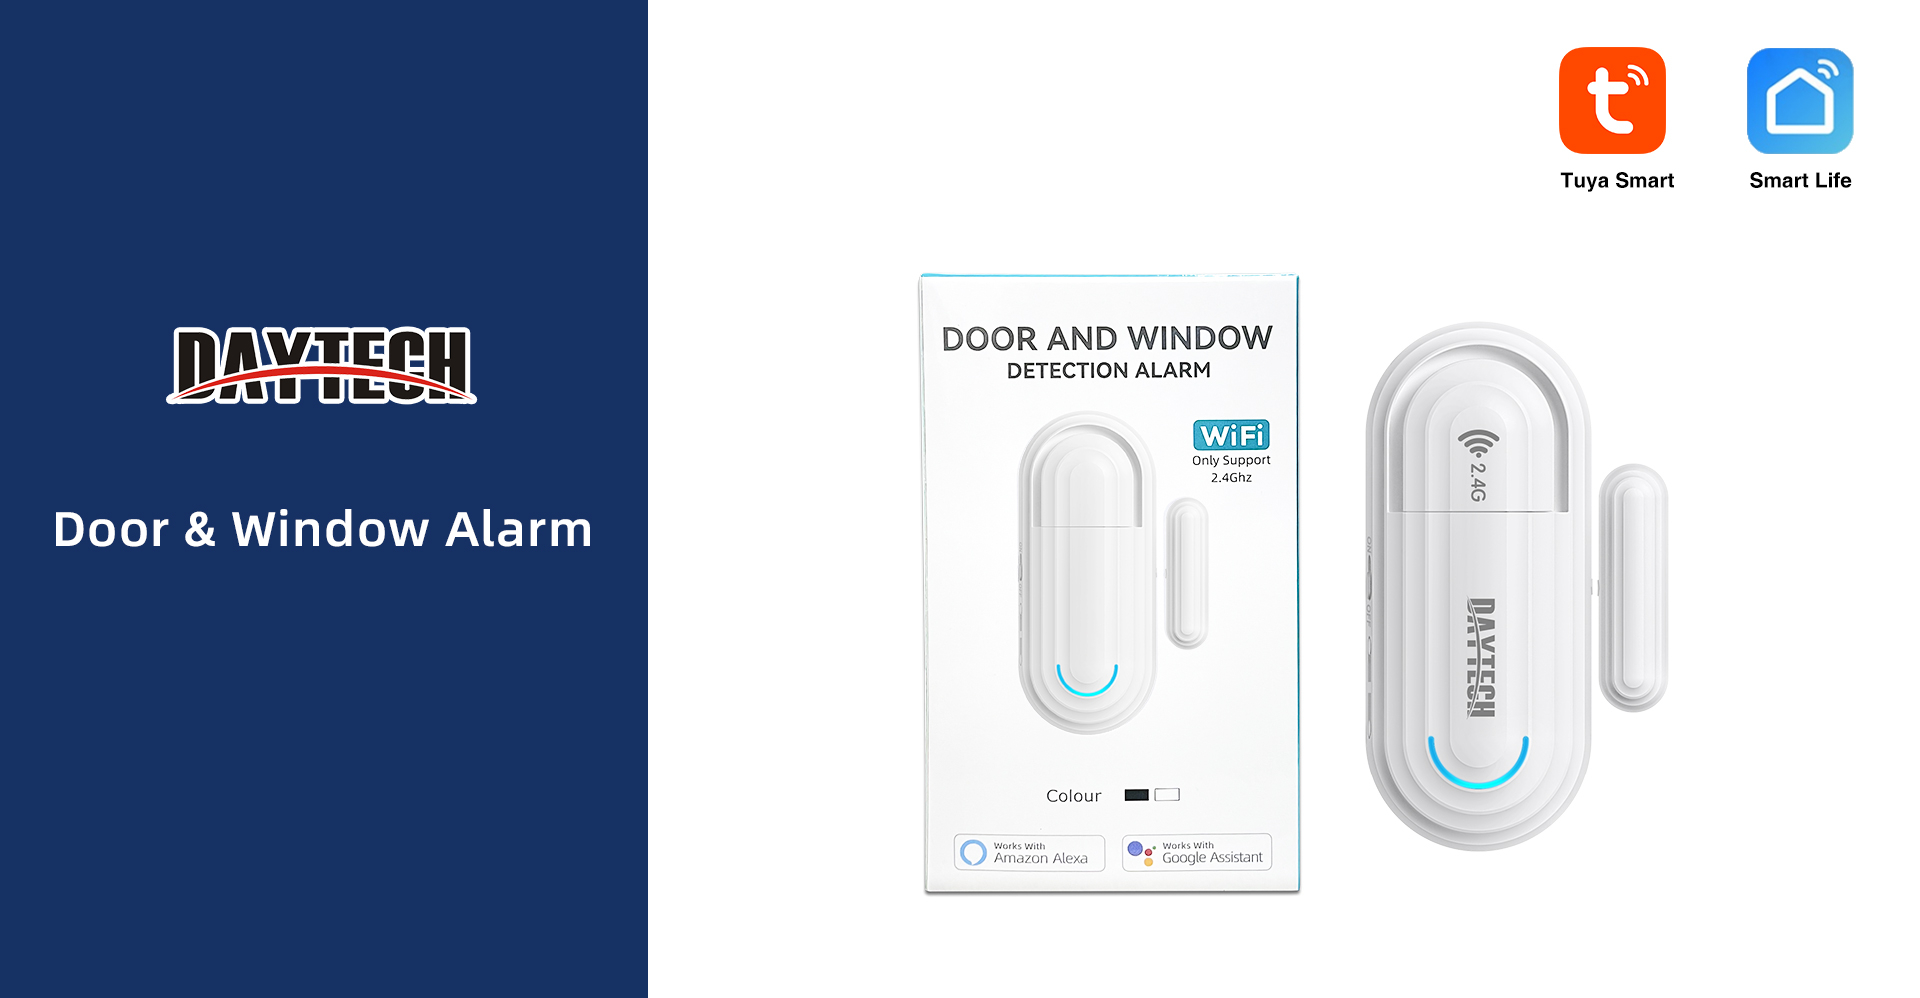 Up To 45% Off on Wansview Wireless Security Ca